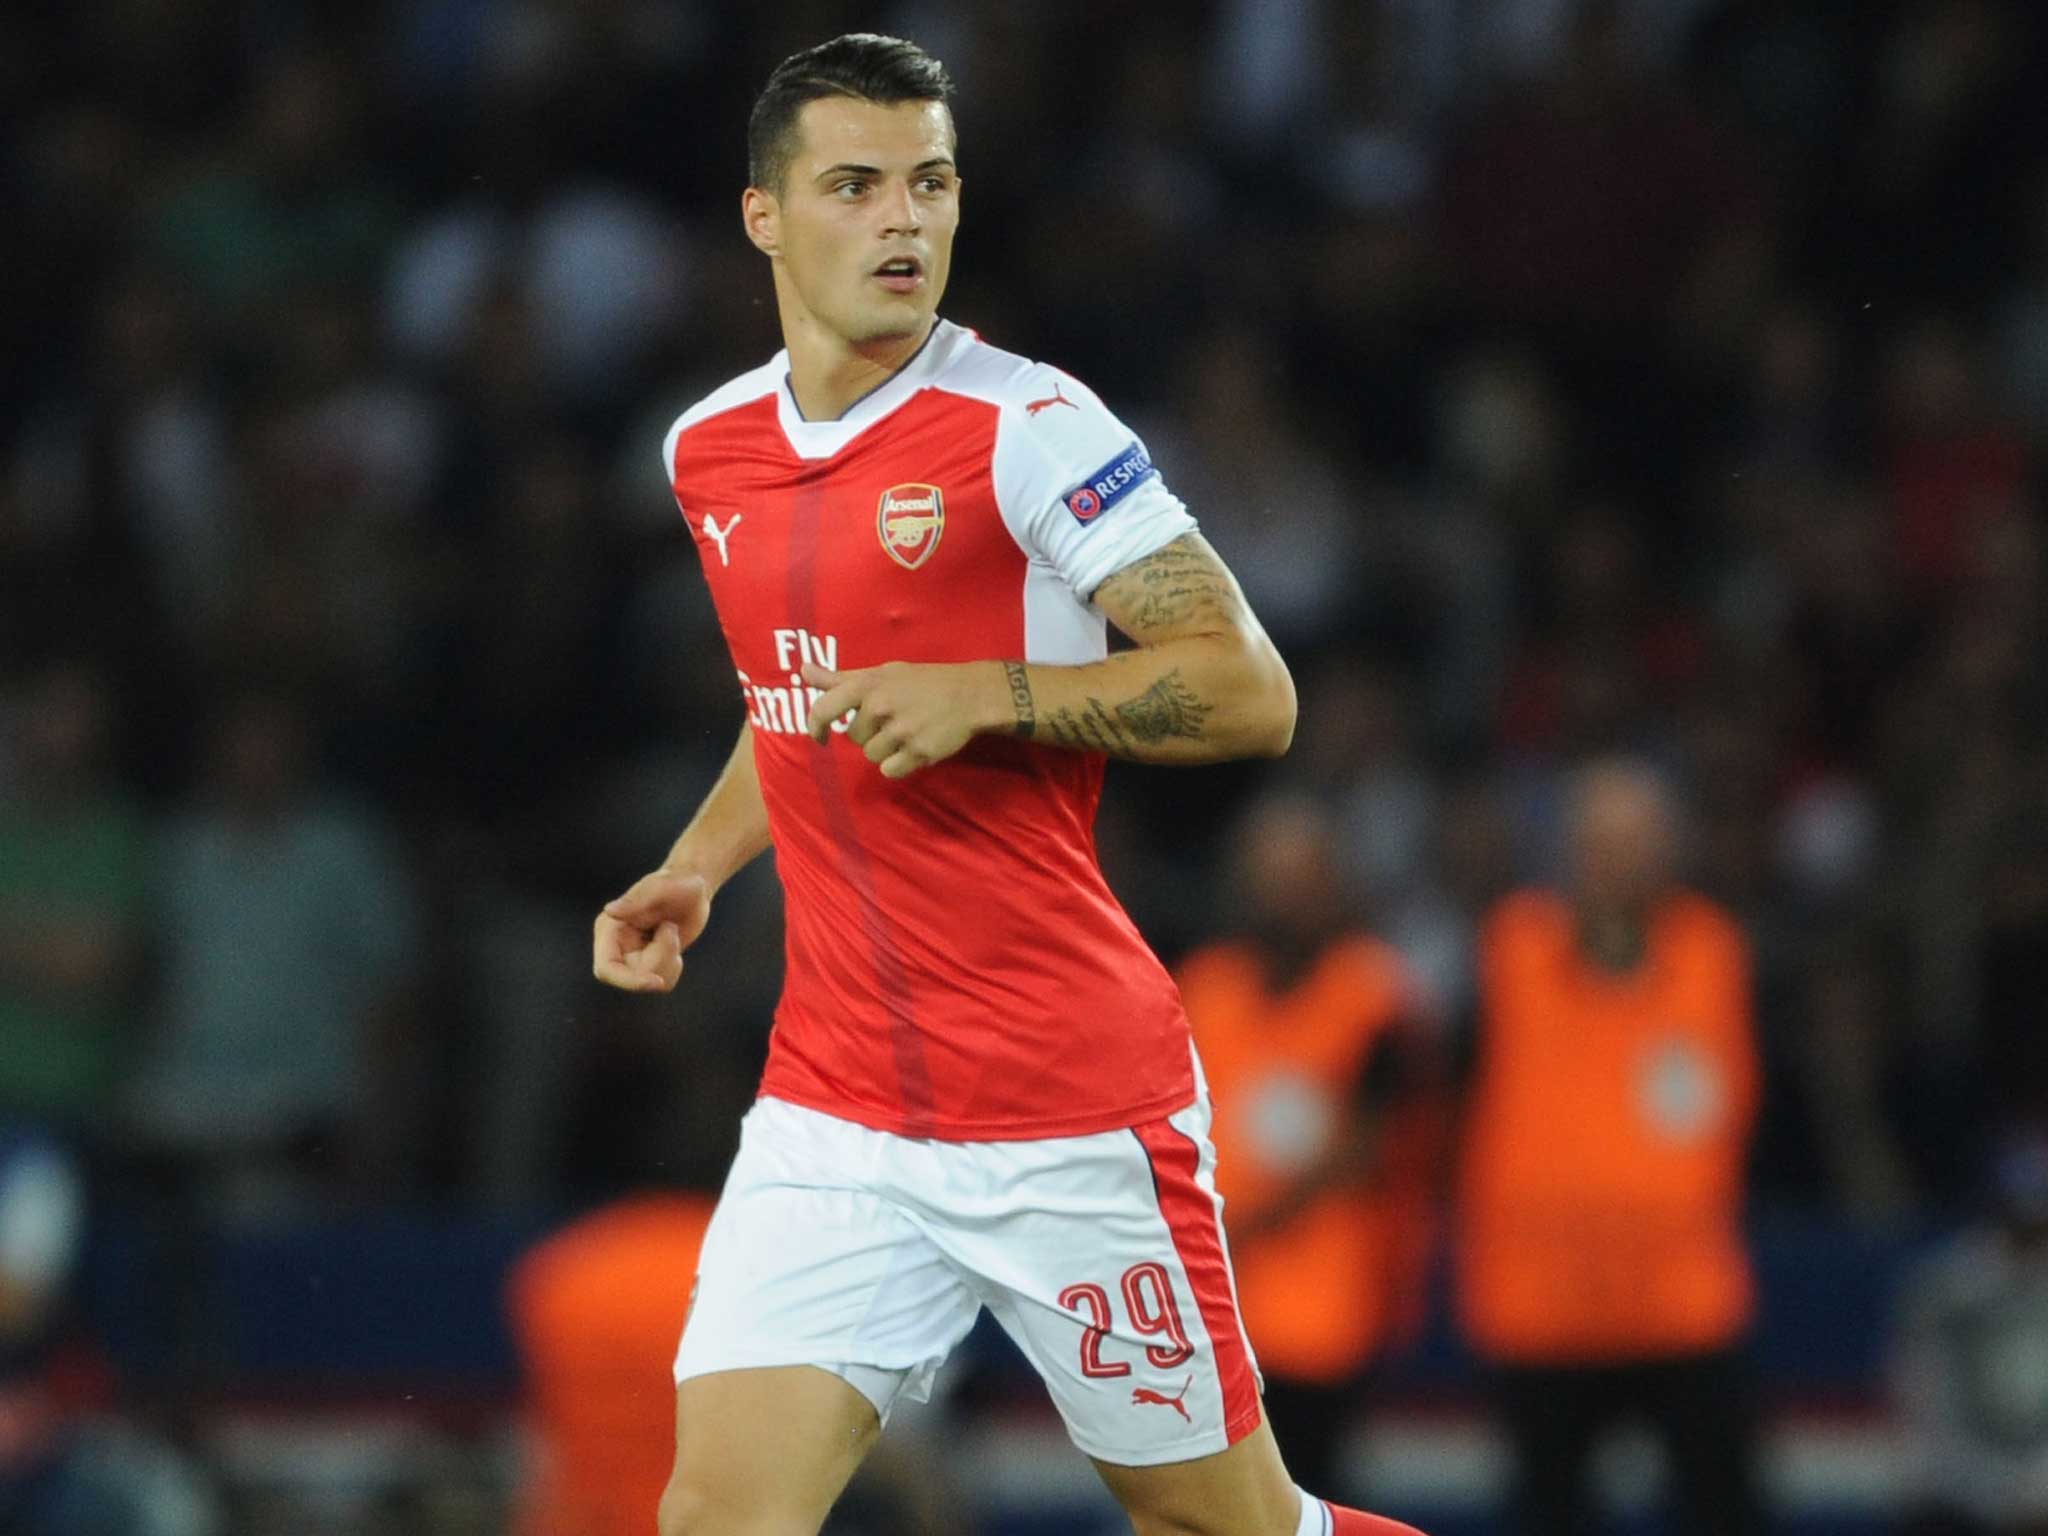 Granit Xhaka has come under fire from some Arsenal supporters